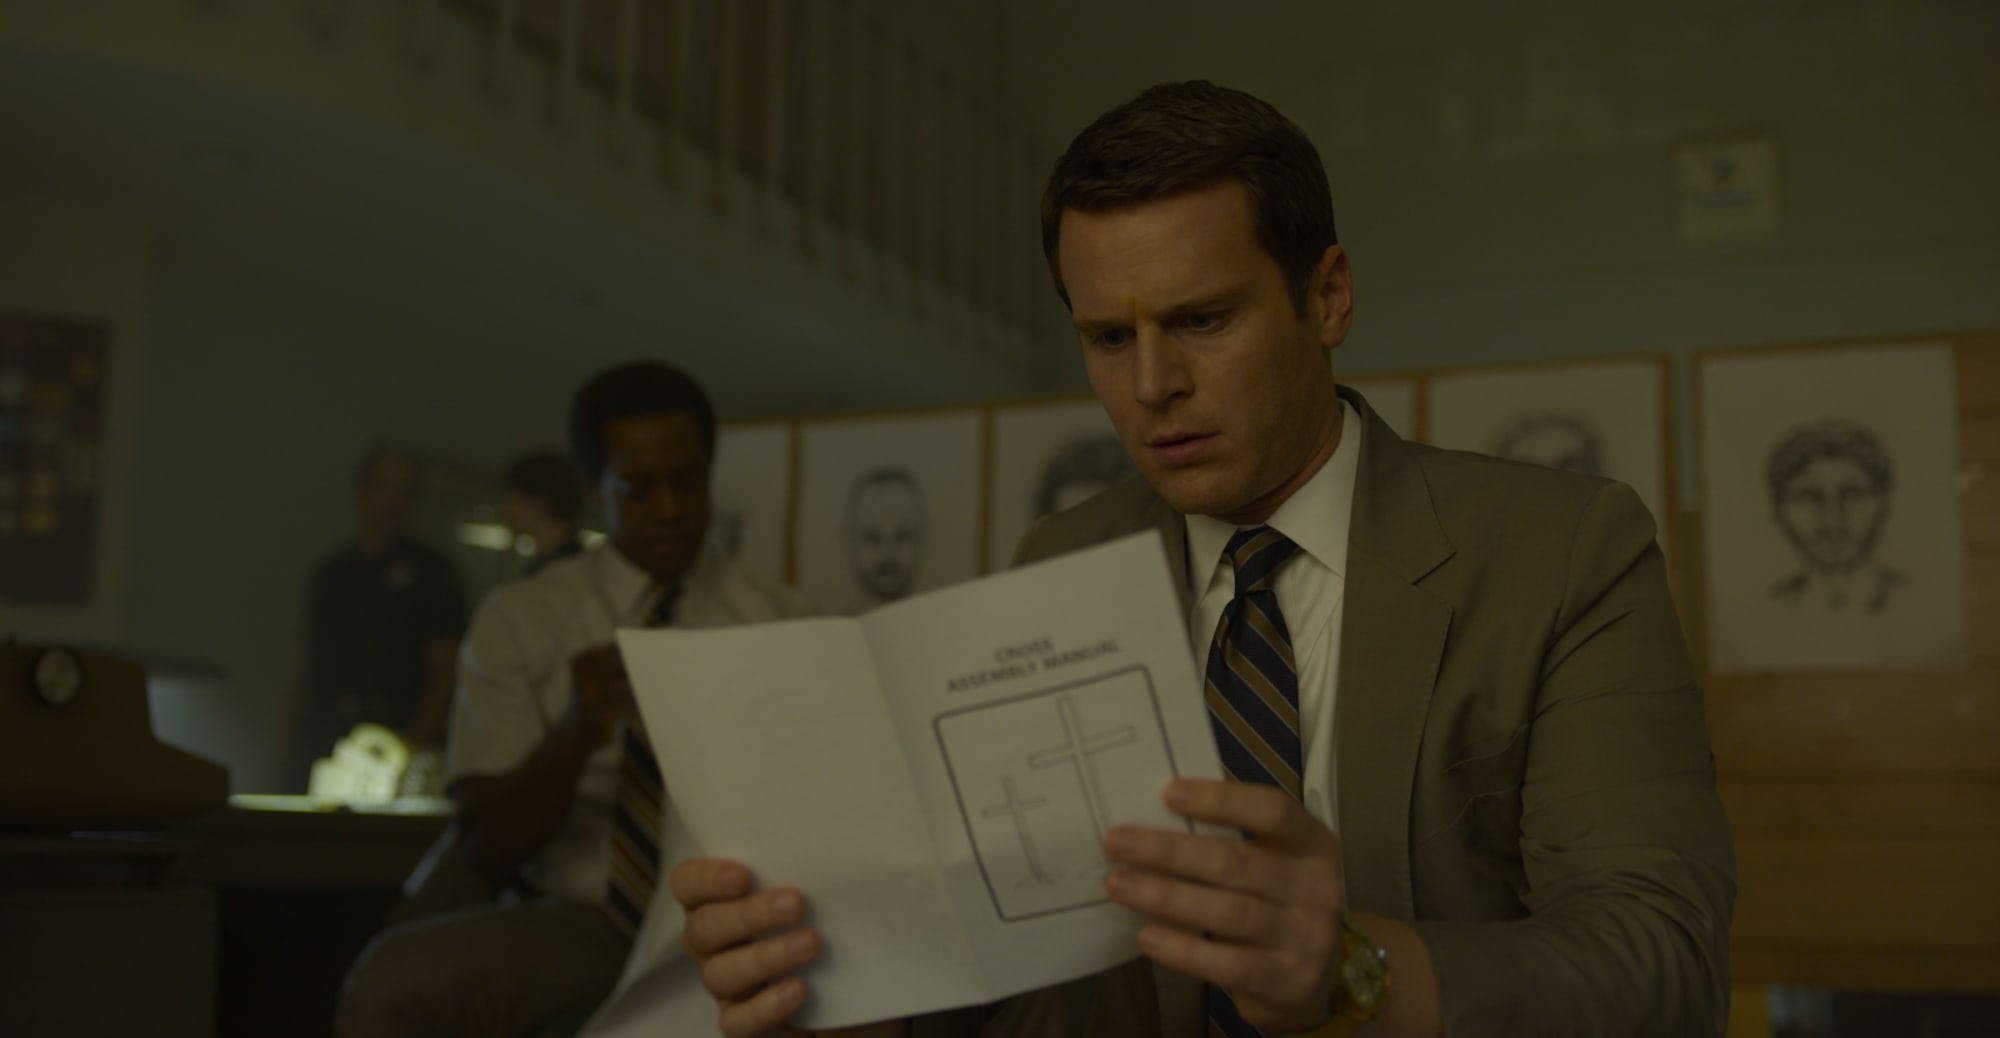 Mindhunter Season 3 not happening - Here's what you need to know about its uncertain future. 13